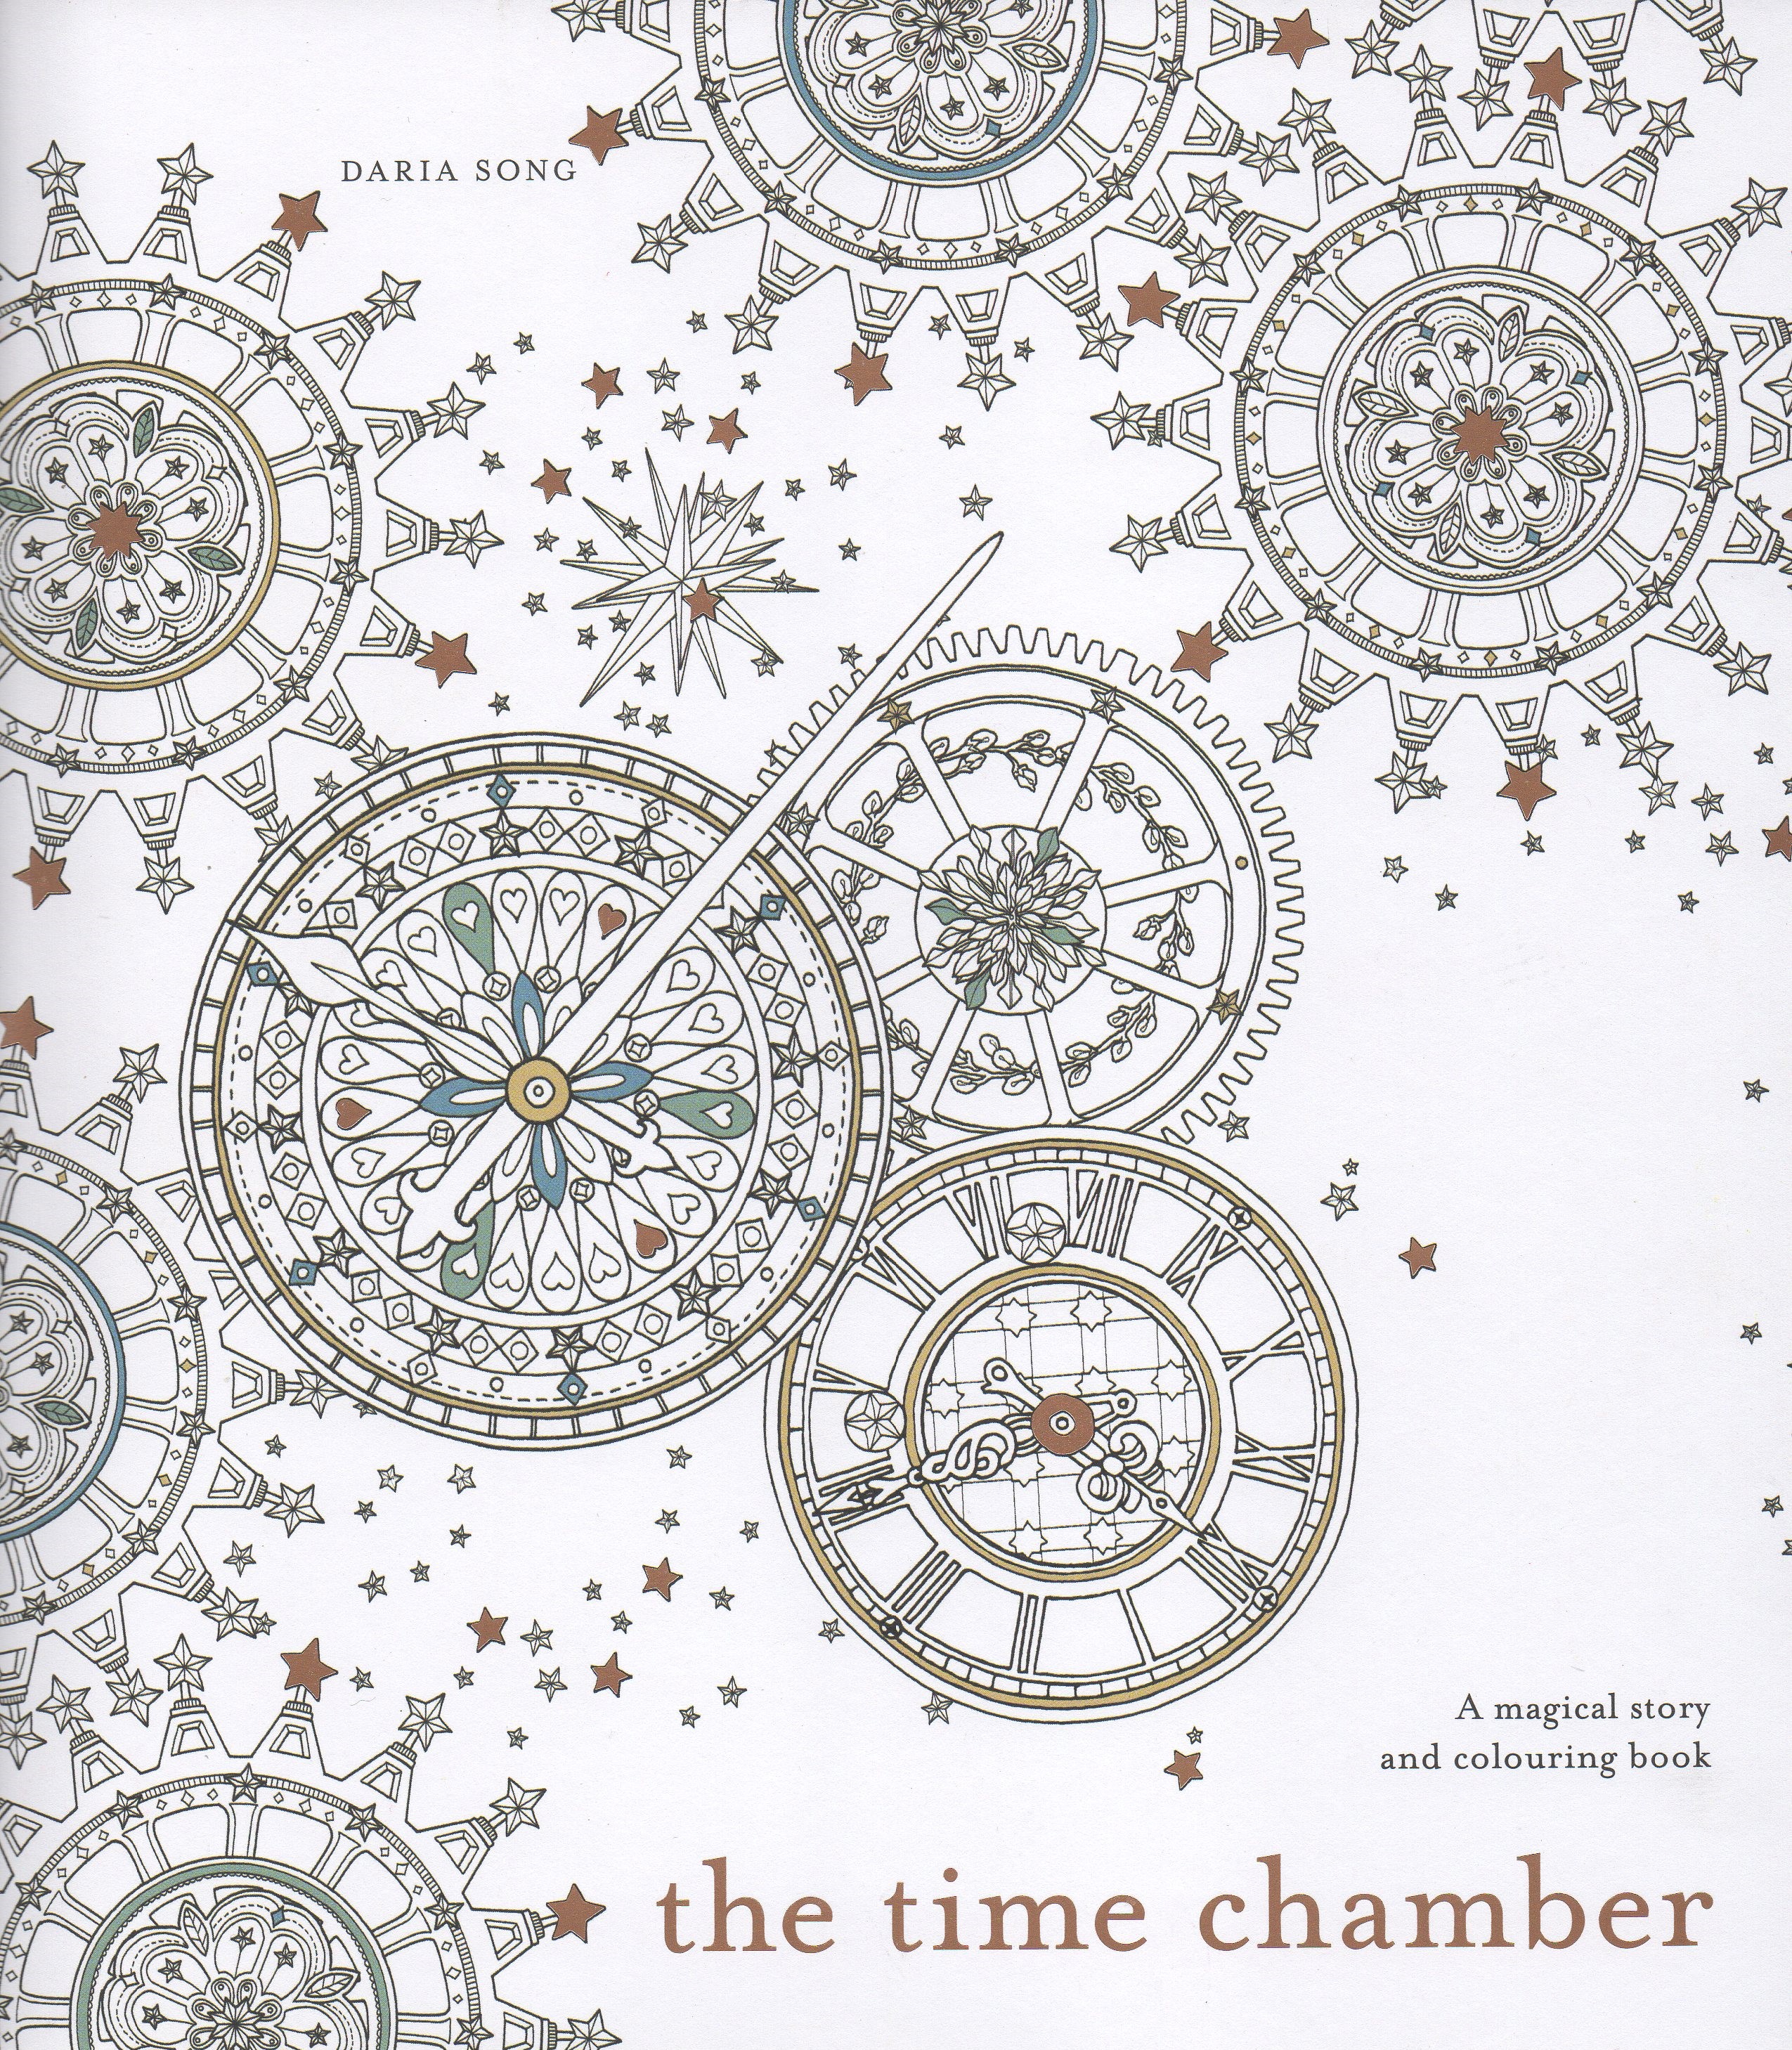 The Time Chamber